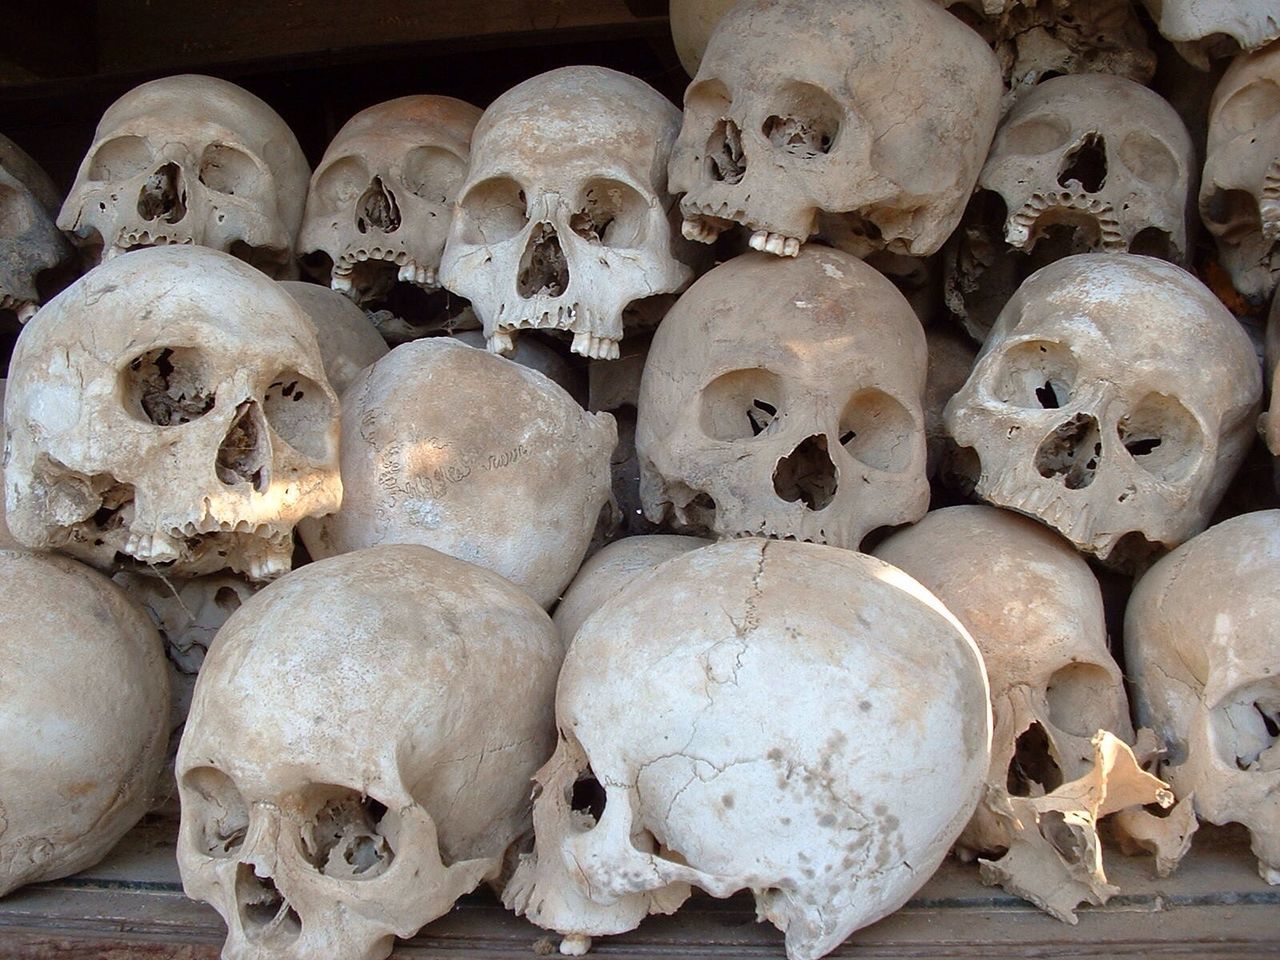 Close-up of human skulls on table